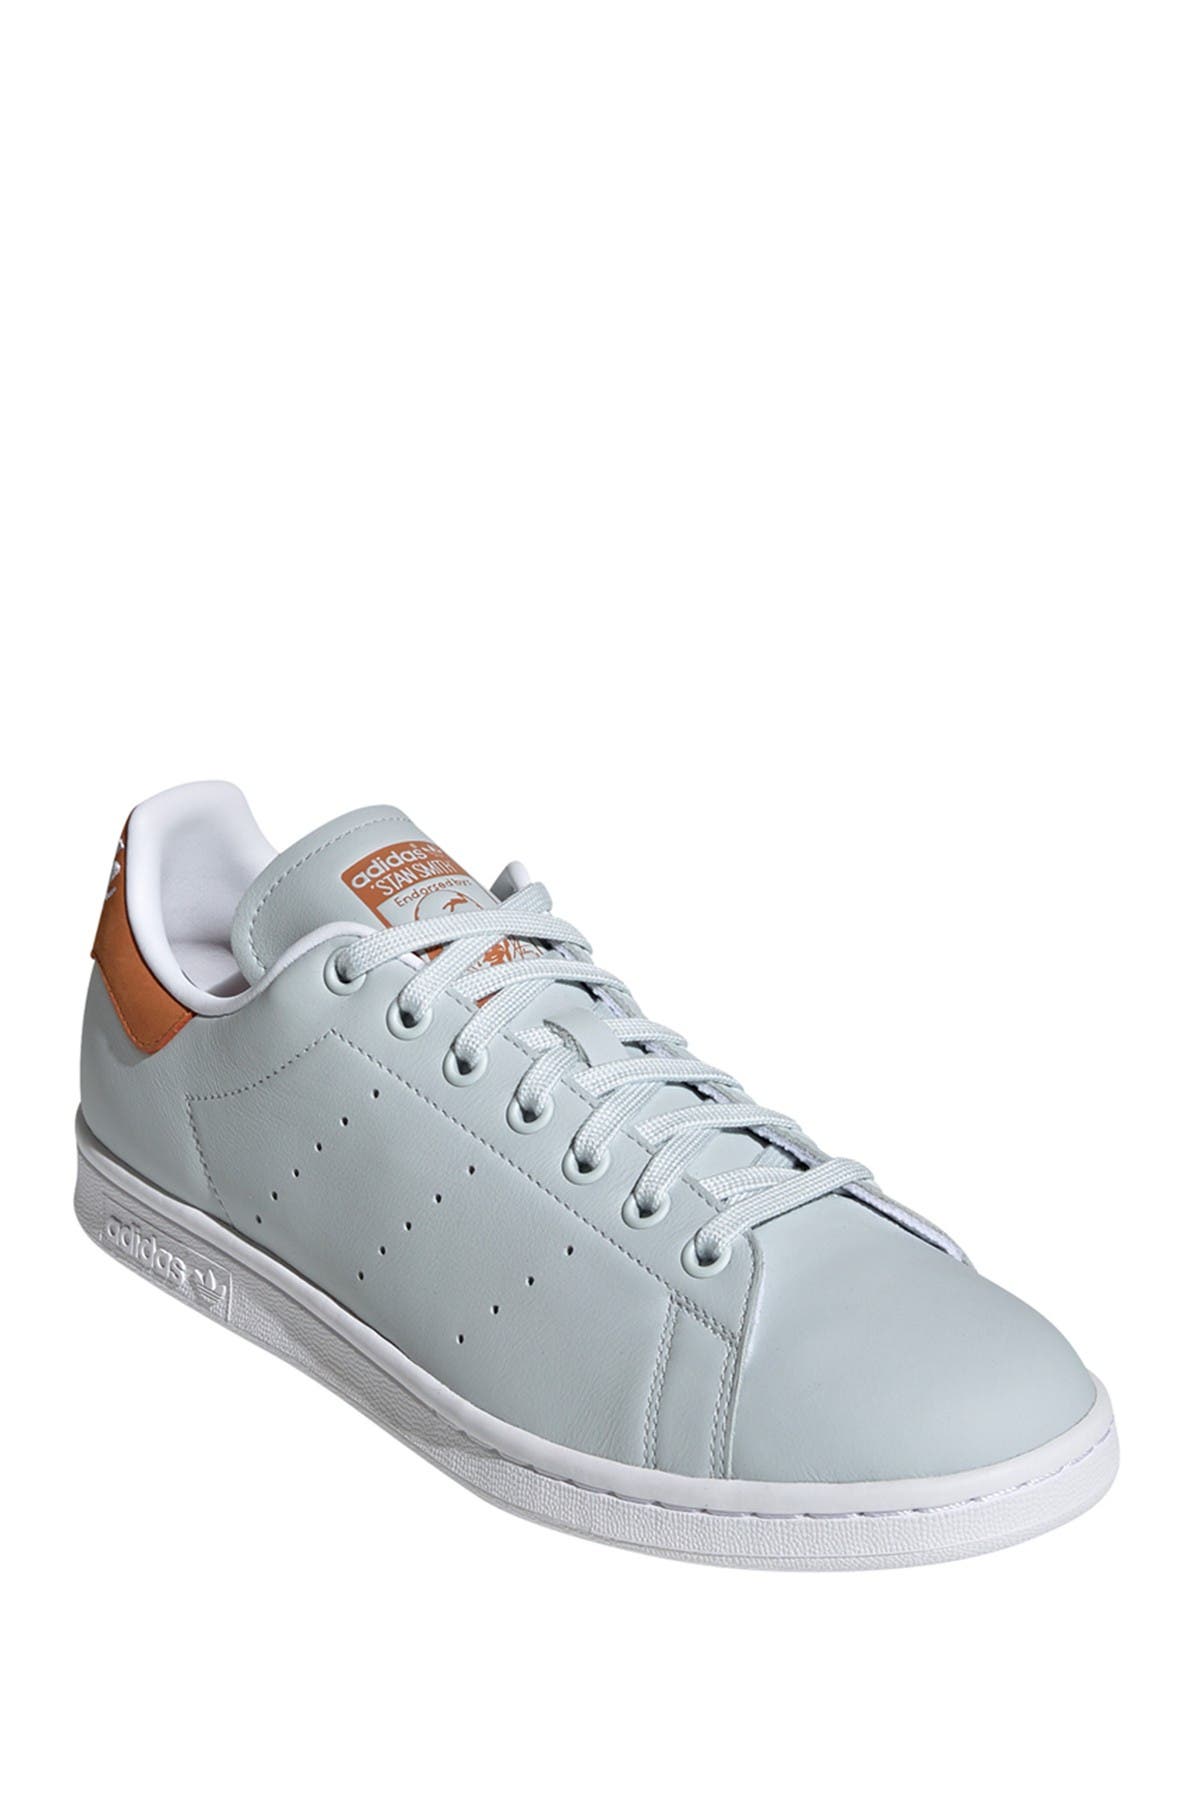 stan smith get low